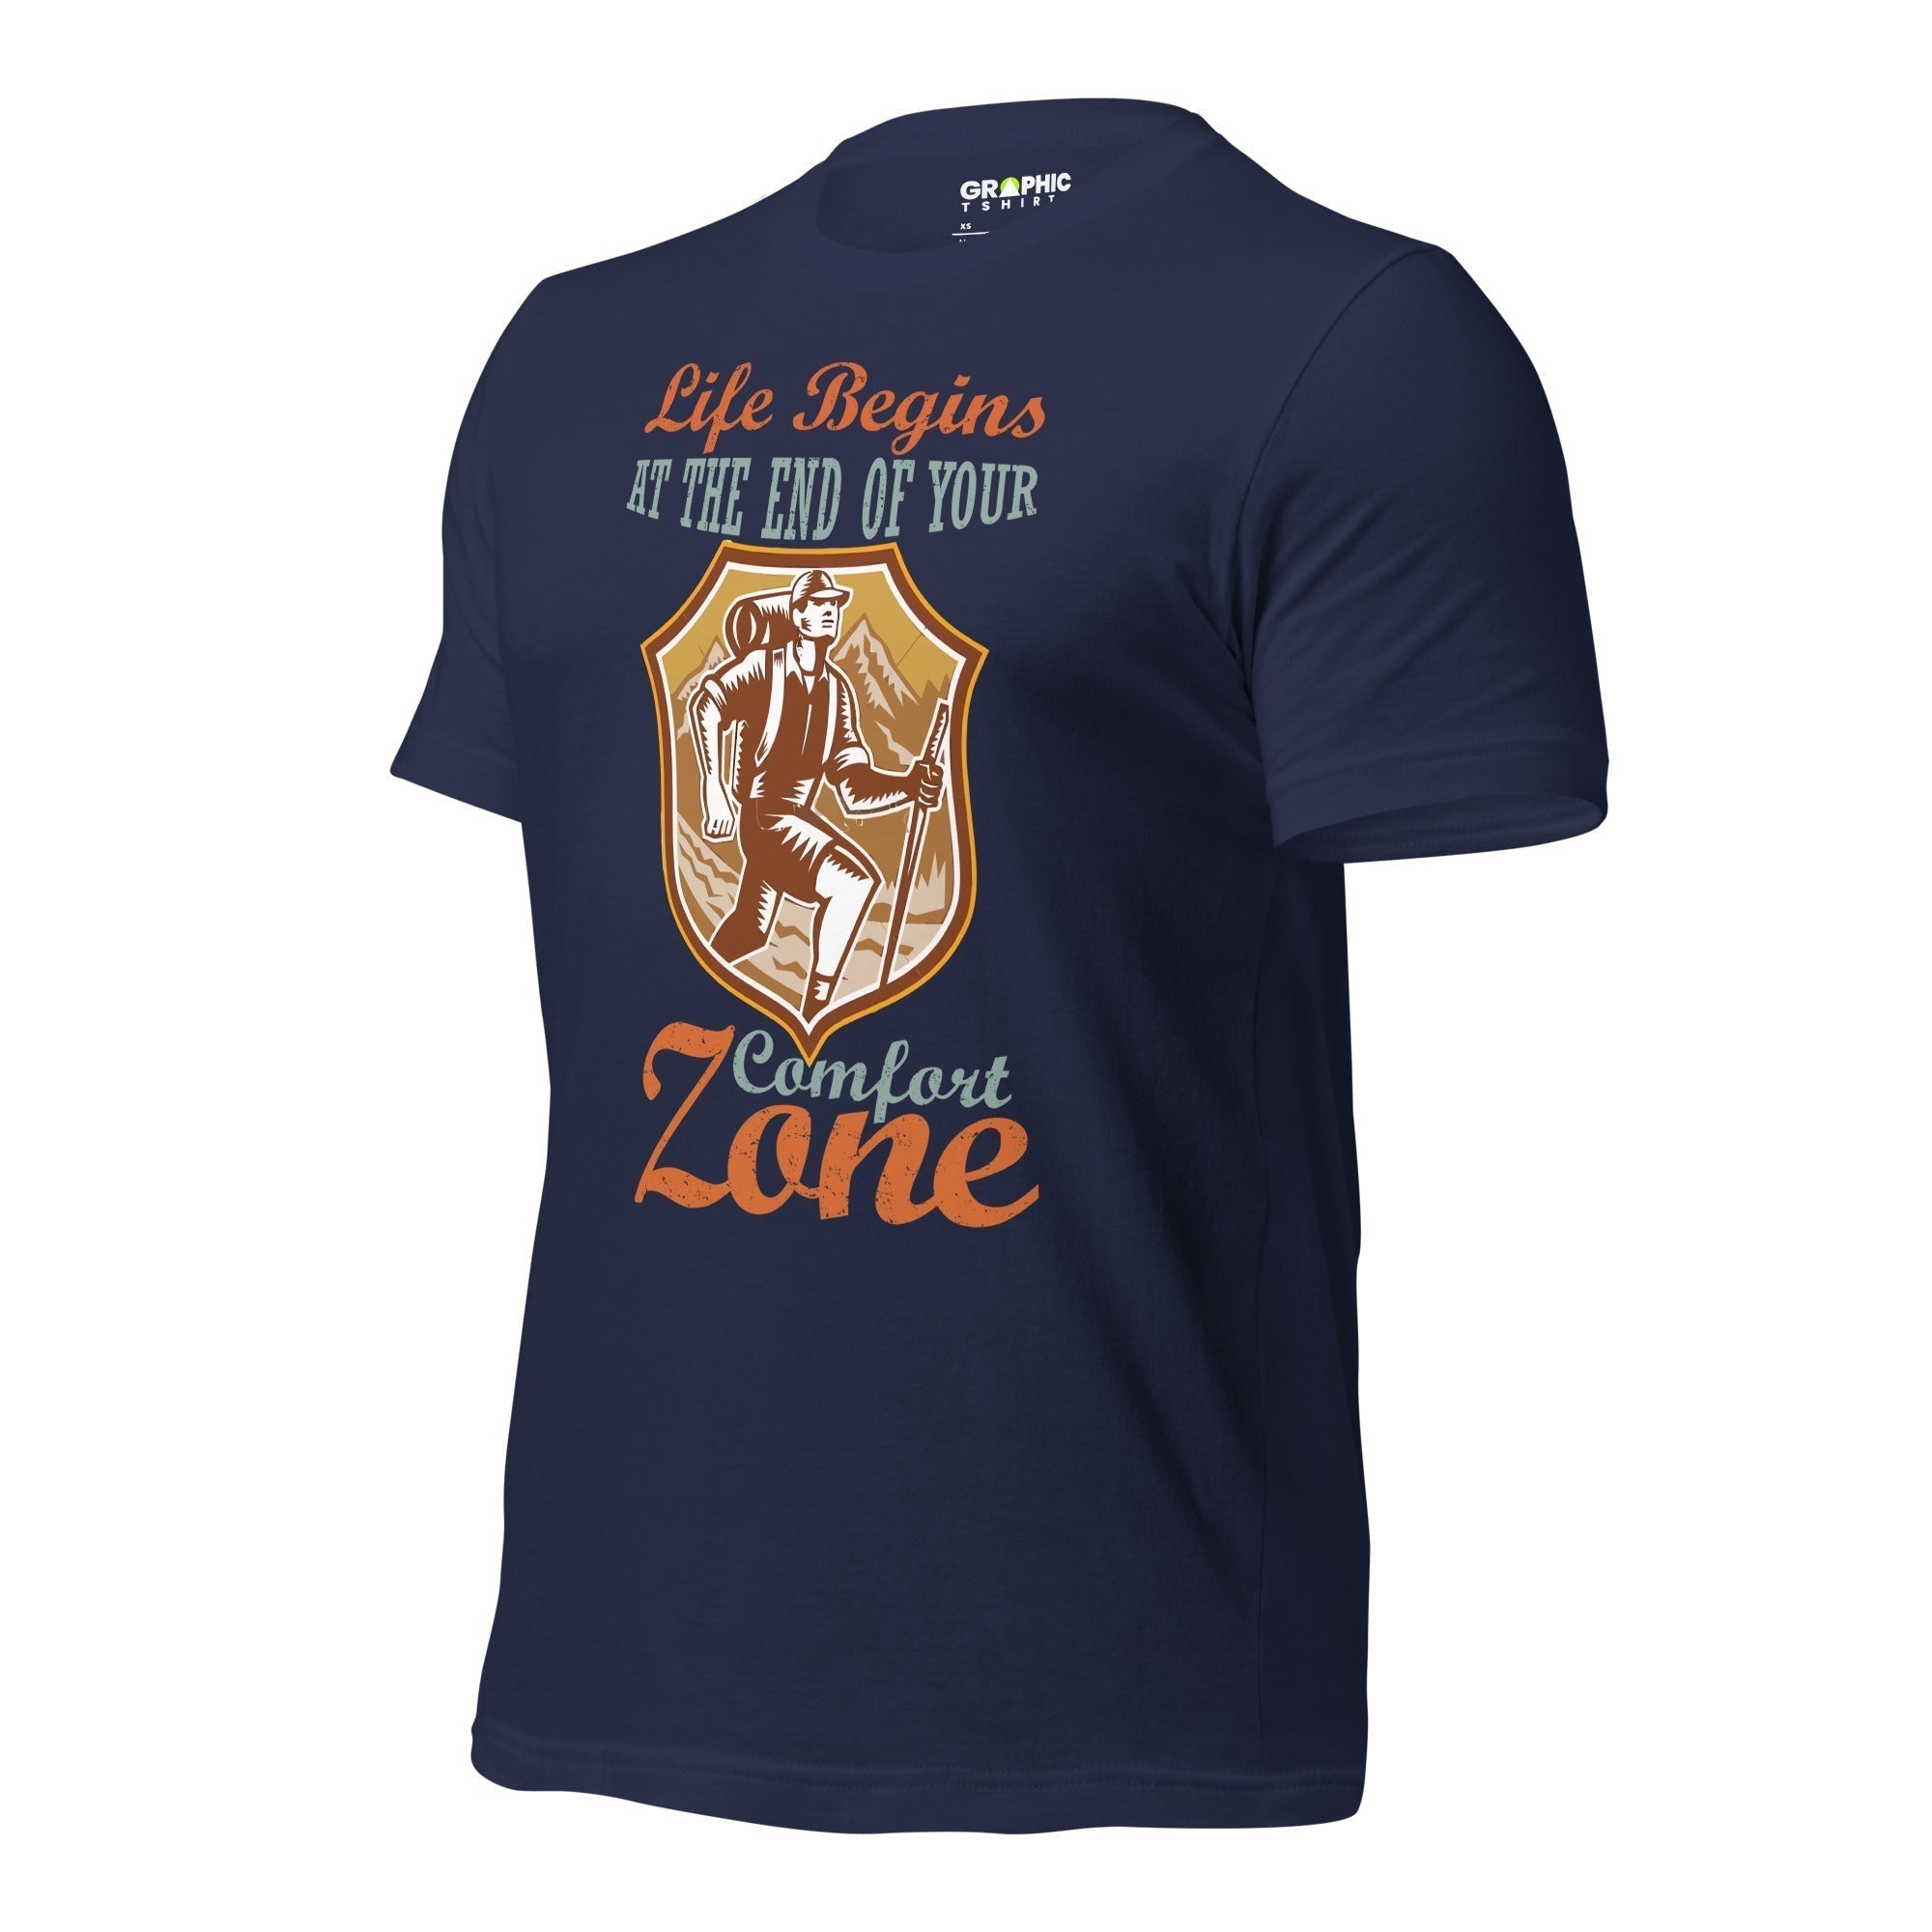 Unisex Staple T-Shirt - Life Begins At The End Of Your Comfort Zone - GRAPHIC T-SHIRTS